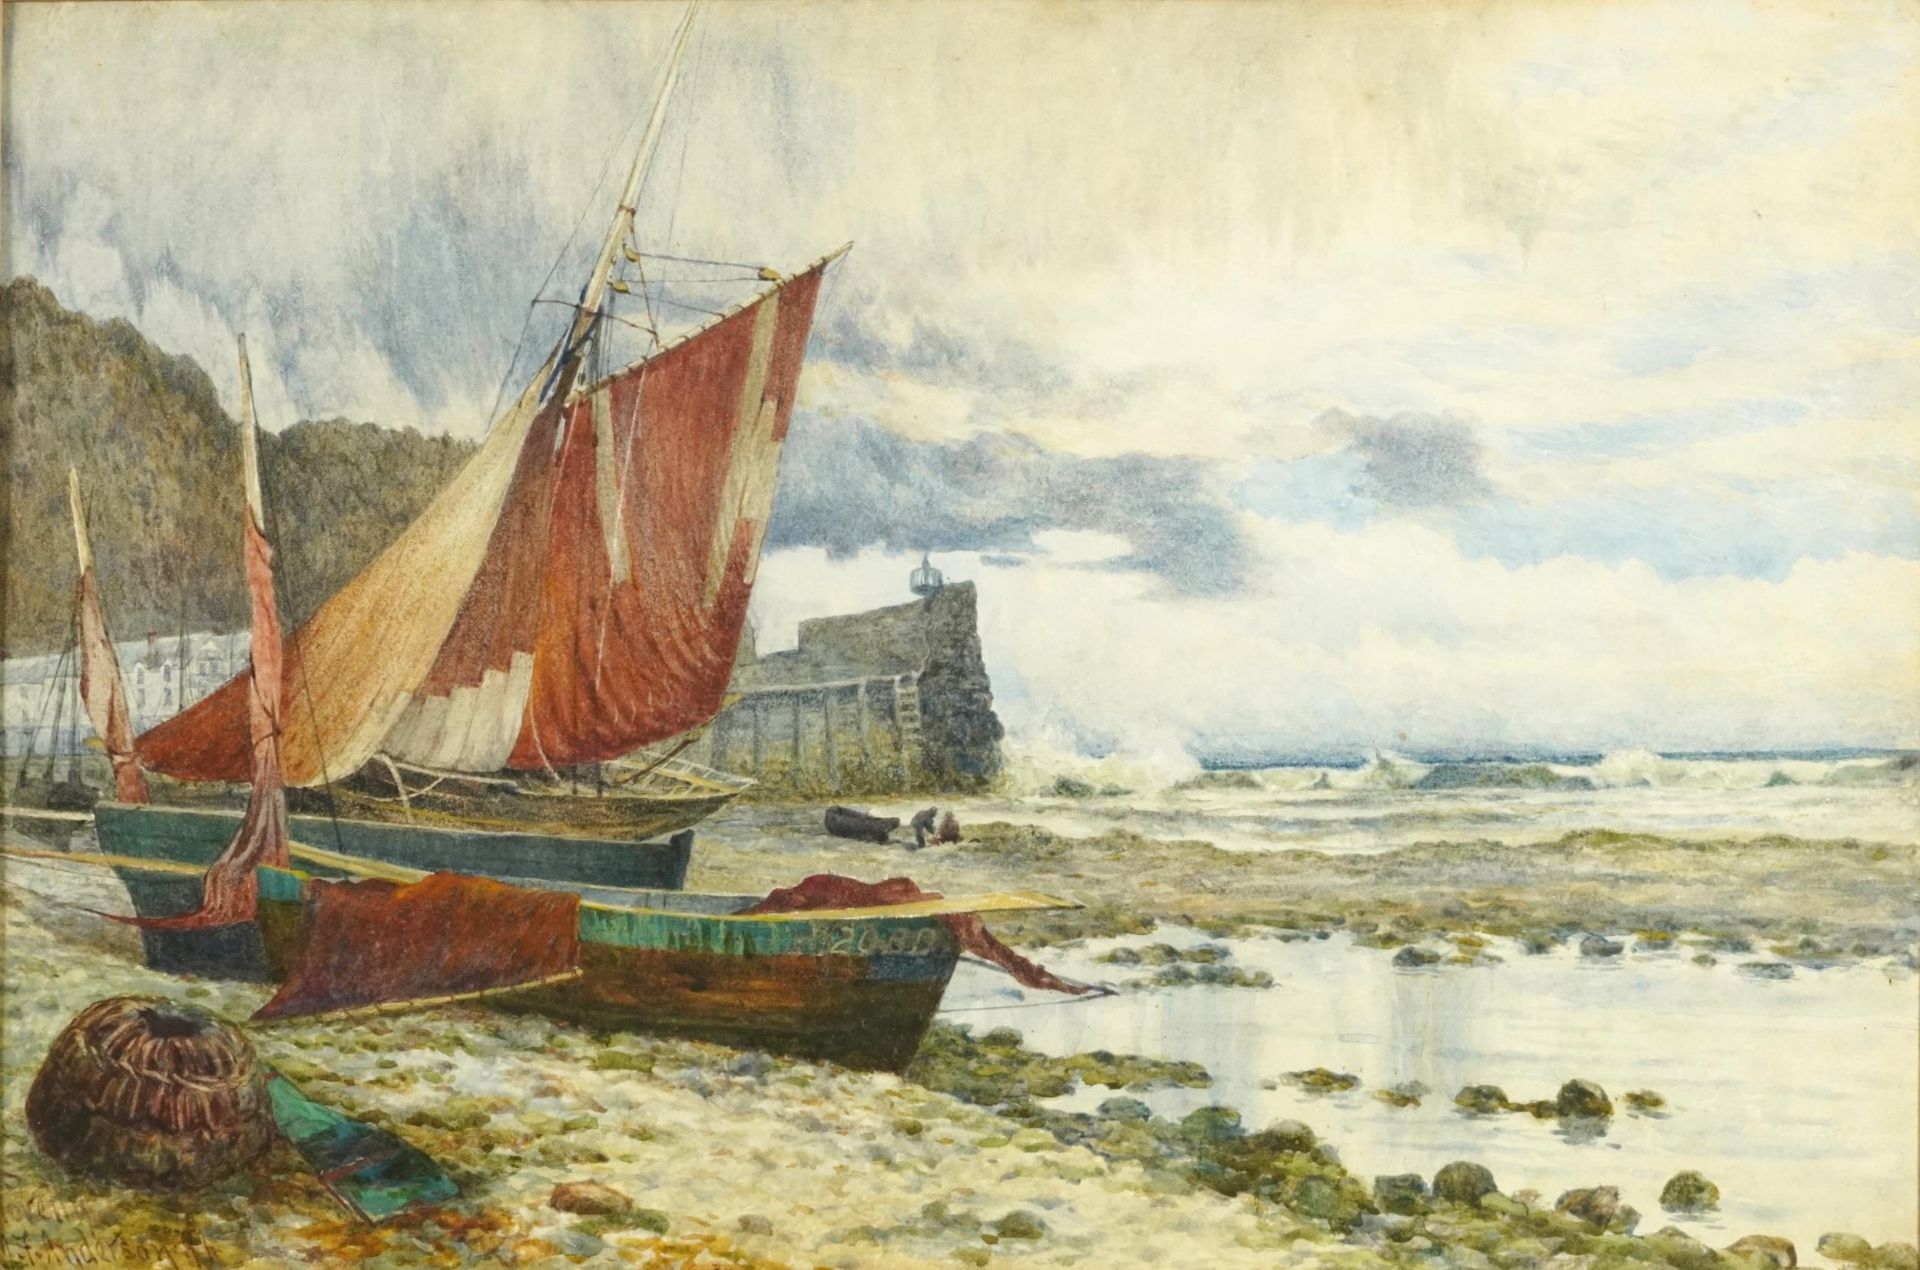 J F Anderson '91 - Coastal landscape with moored fishing boats before a lighthouse, late 19th